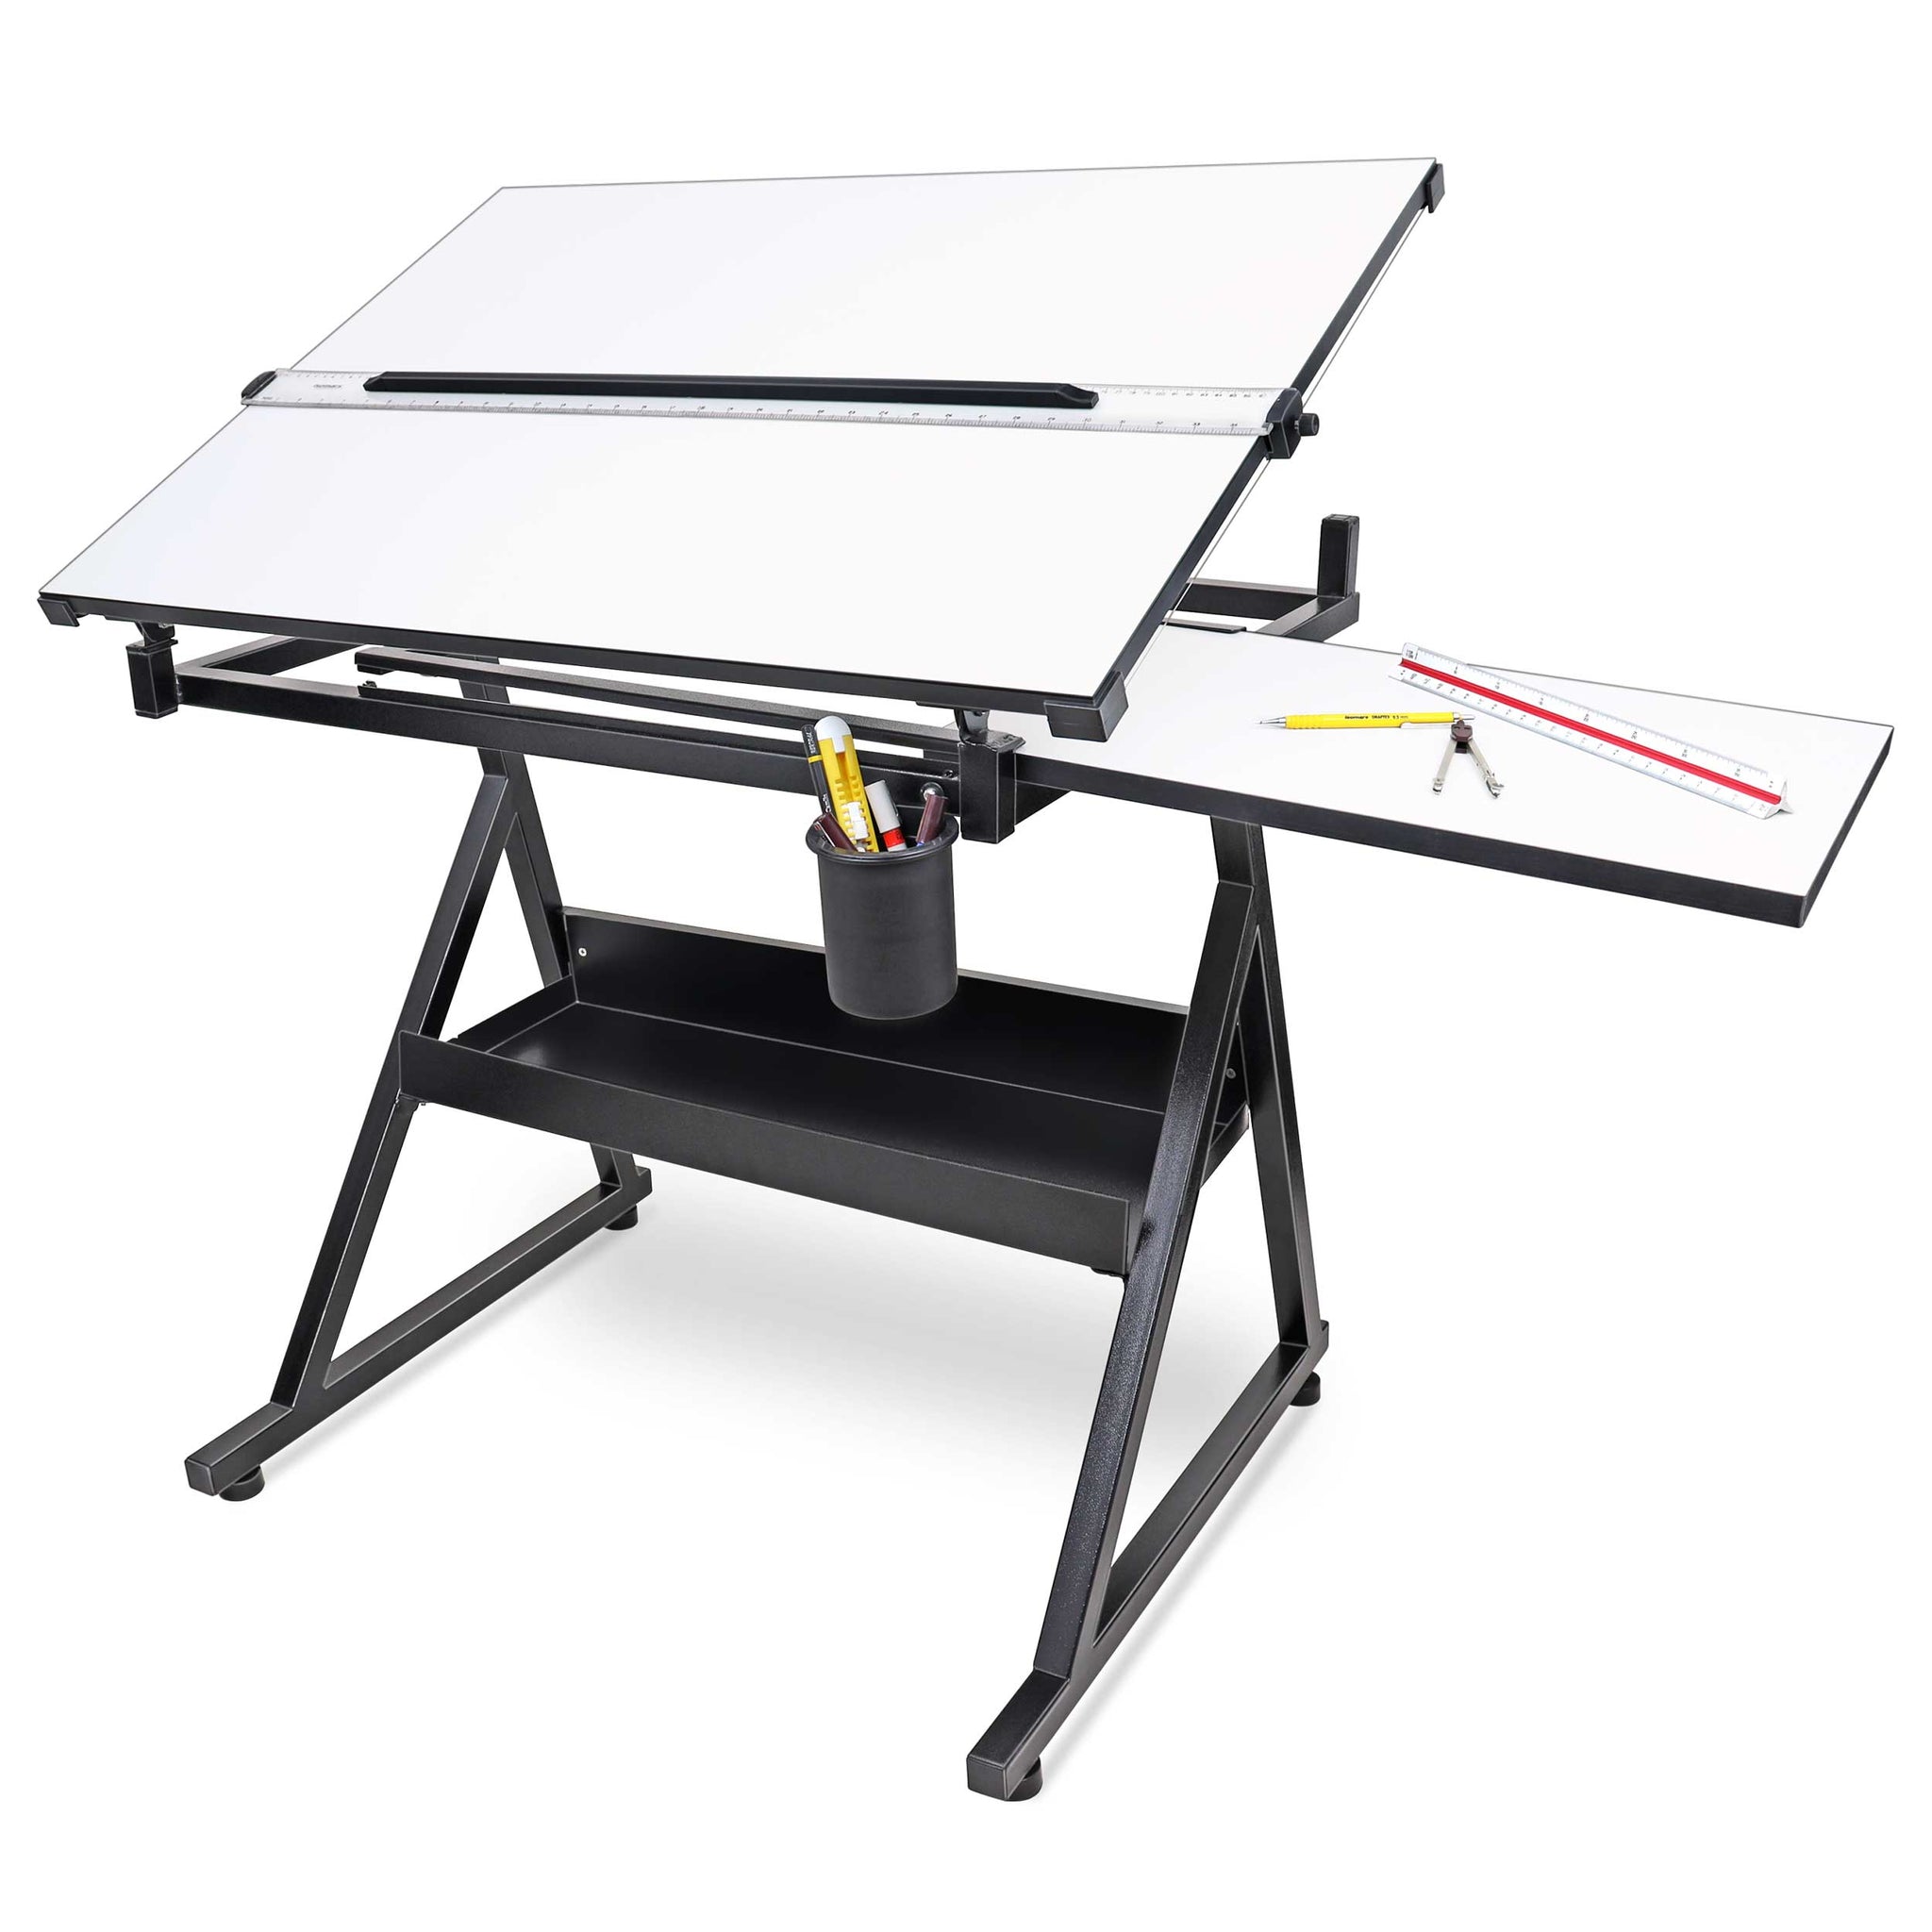 Drafting Board Multifunctional Drafting Table with Parallel Bars  Architectural Technical Slide Ruler Drafting for Architects